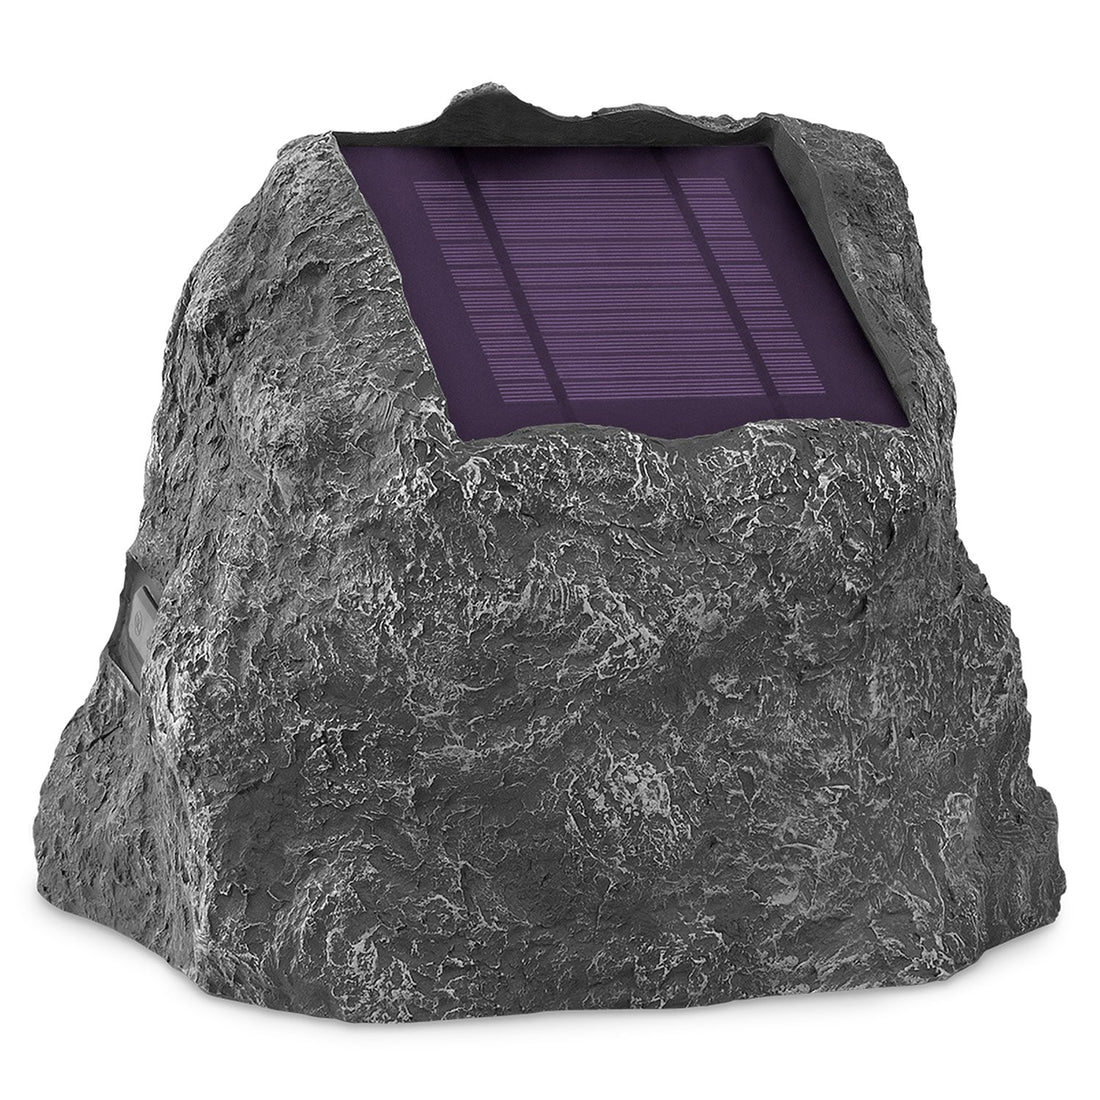 Innovative Technology Premium 5-Watt Bluetooth Outdoor Rock Speakers with A/C Adaptor, Built In Rechargeable 5200mAh Battery and Solar Panels, Pair, Charcoal